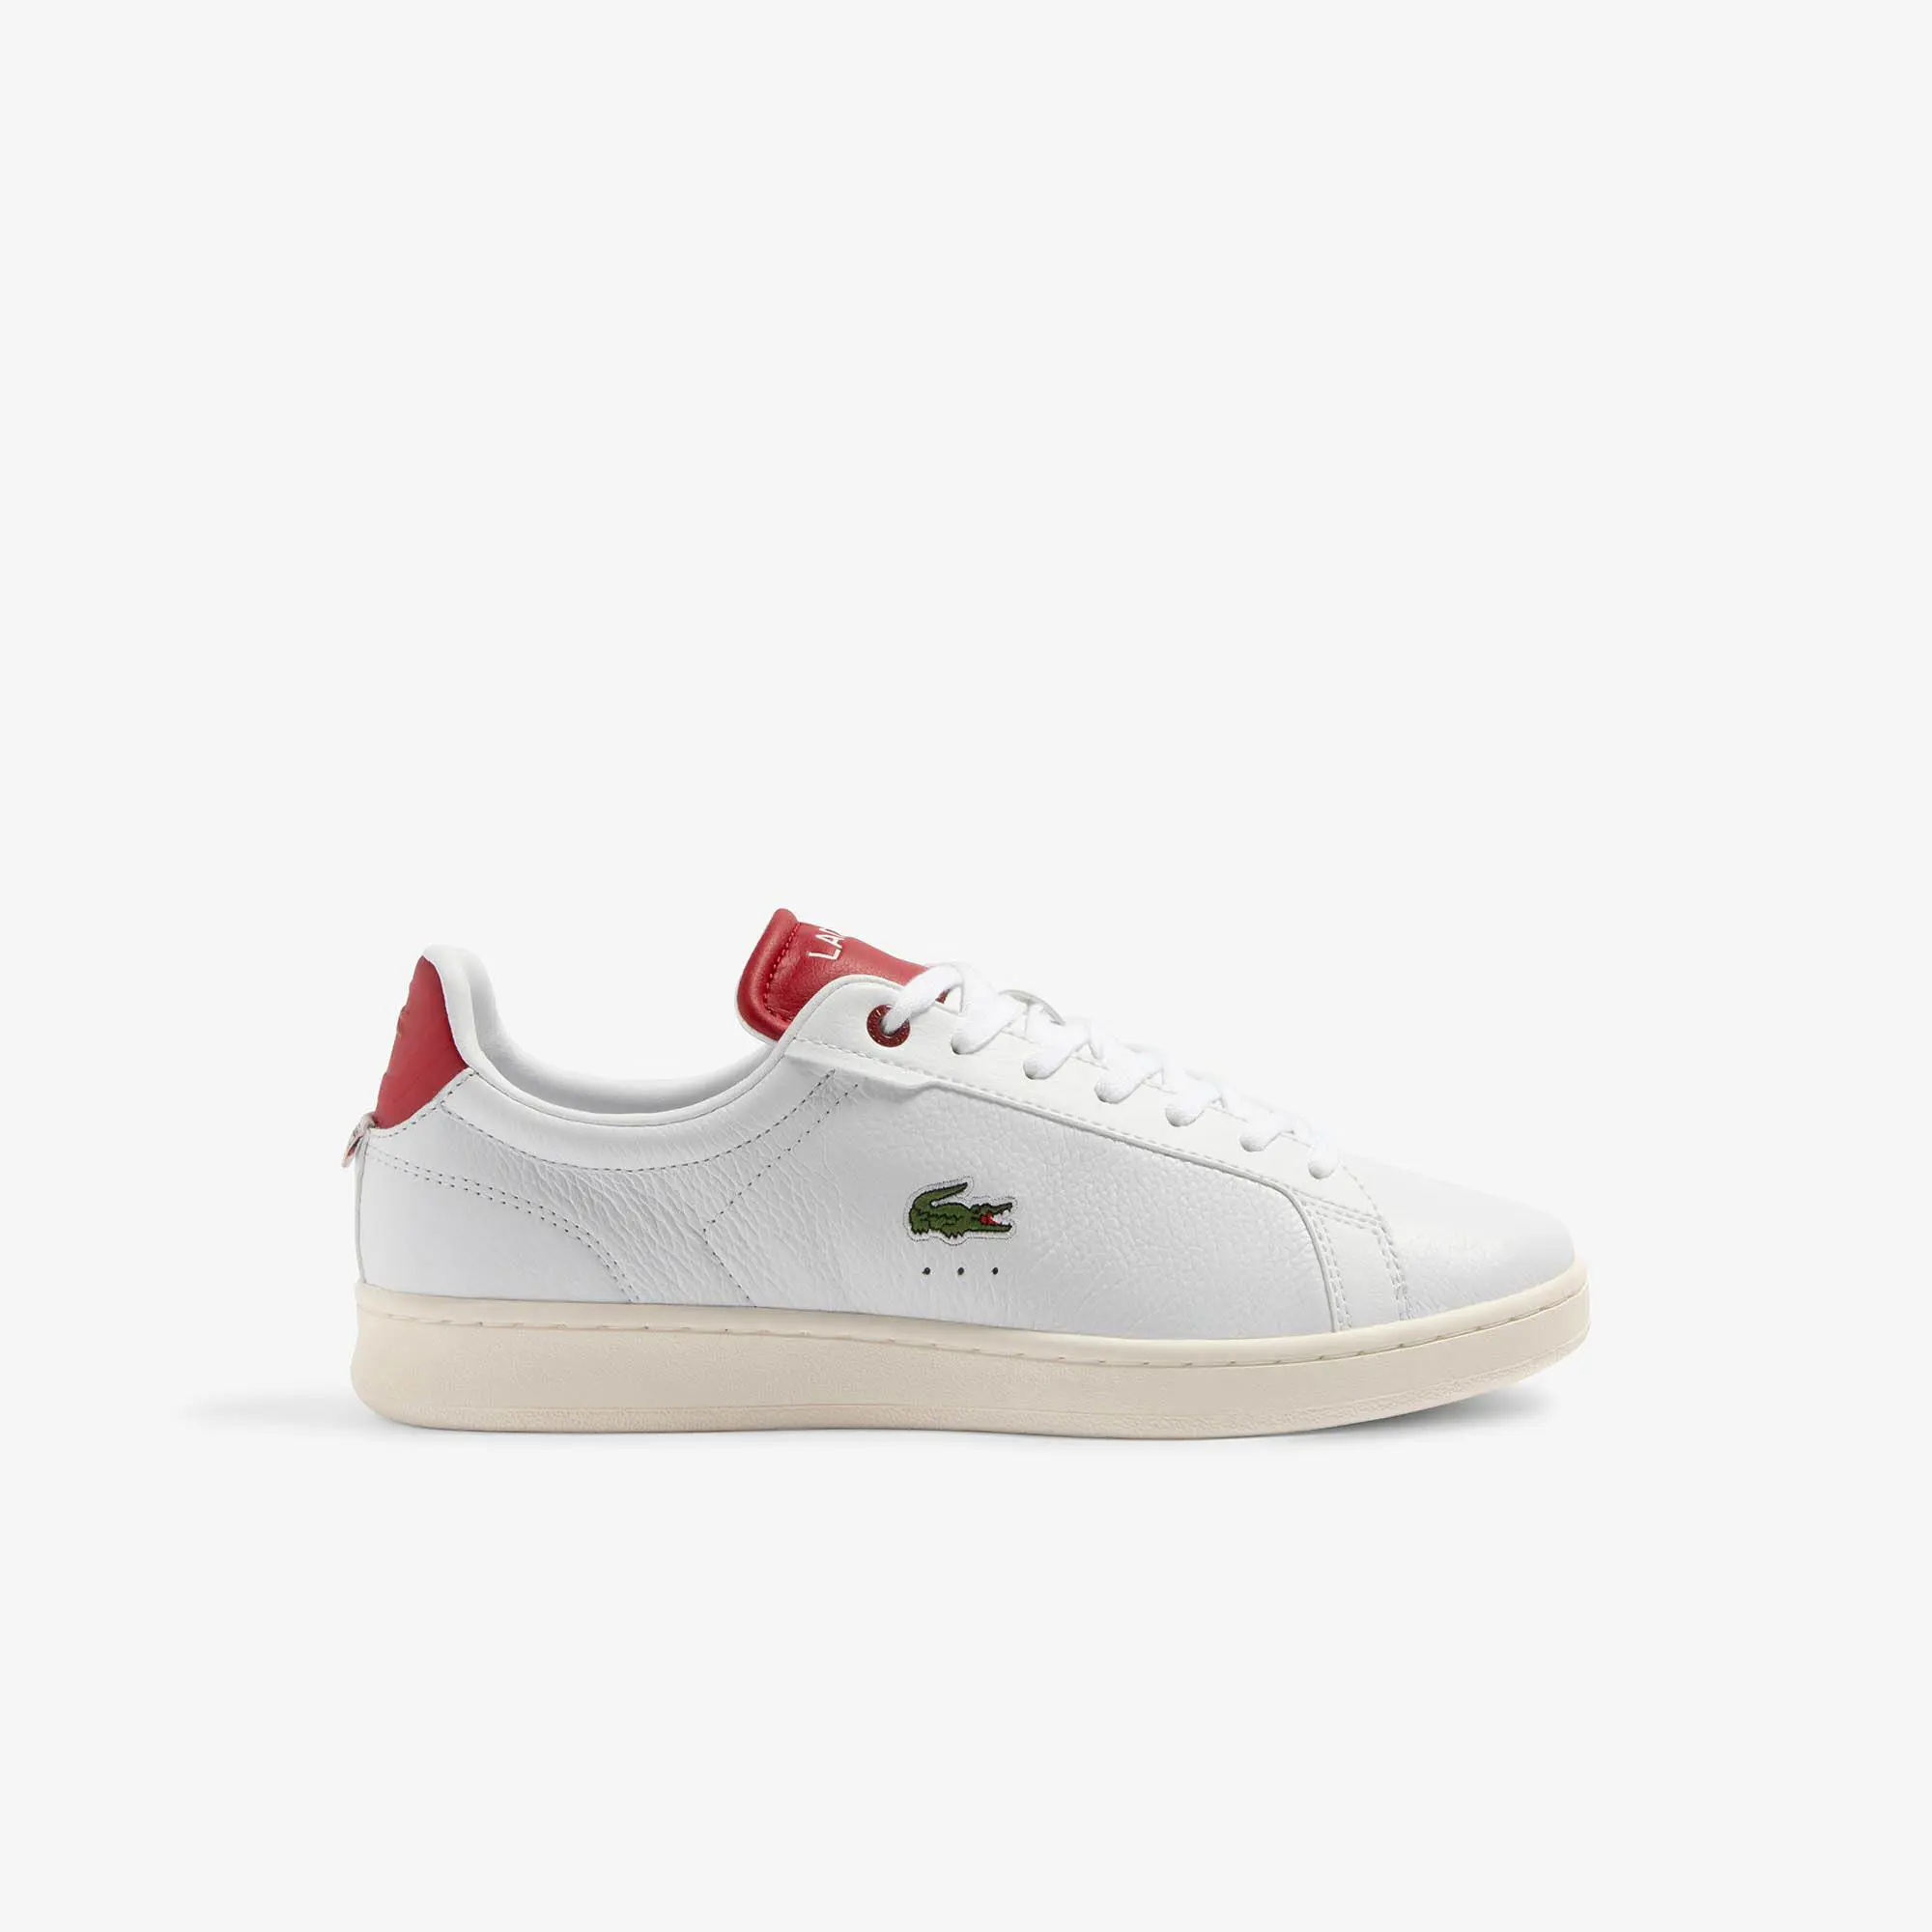 Lacoste Men's Carnaby Pro Heel Detail Leather Trainers. 1